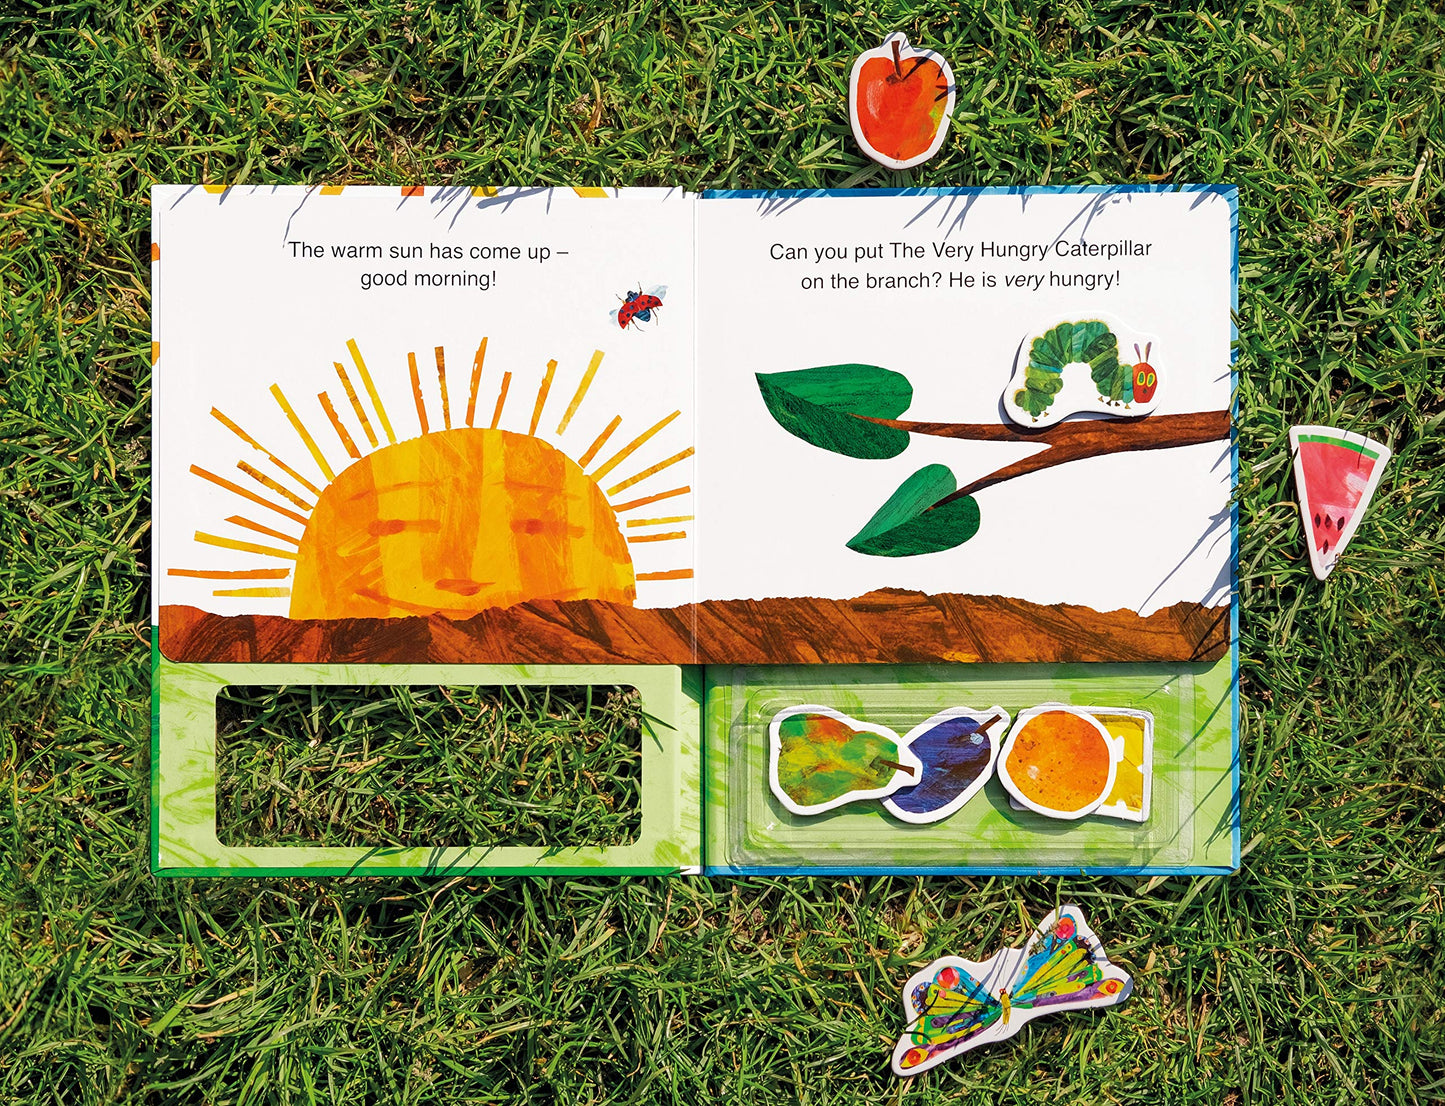 The Very Hungry Caterpillar's Magnet Book Eric Carle - WERONE